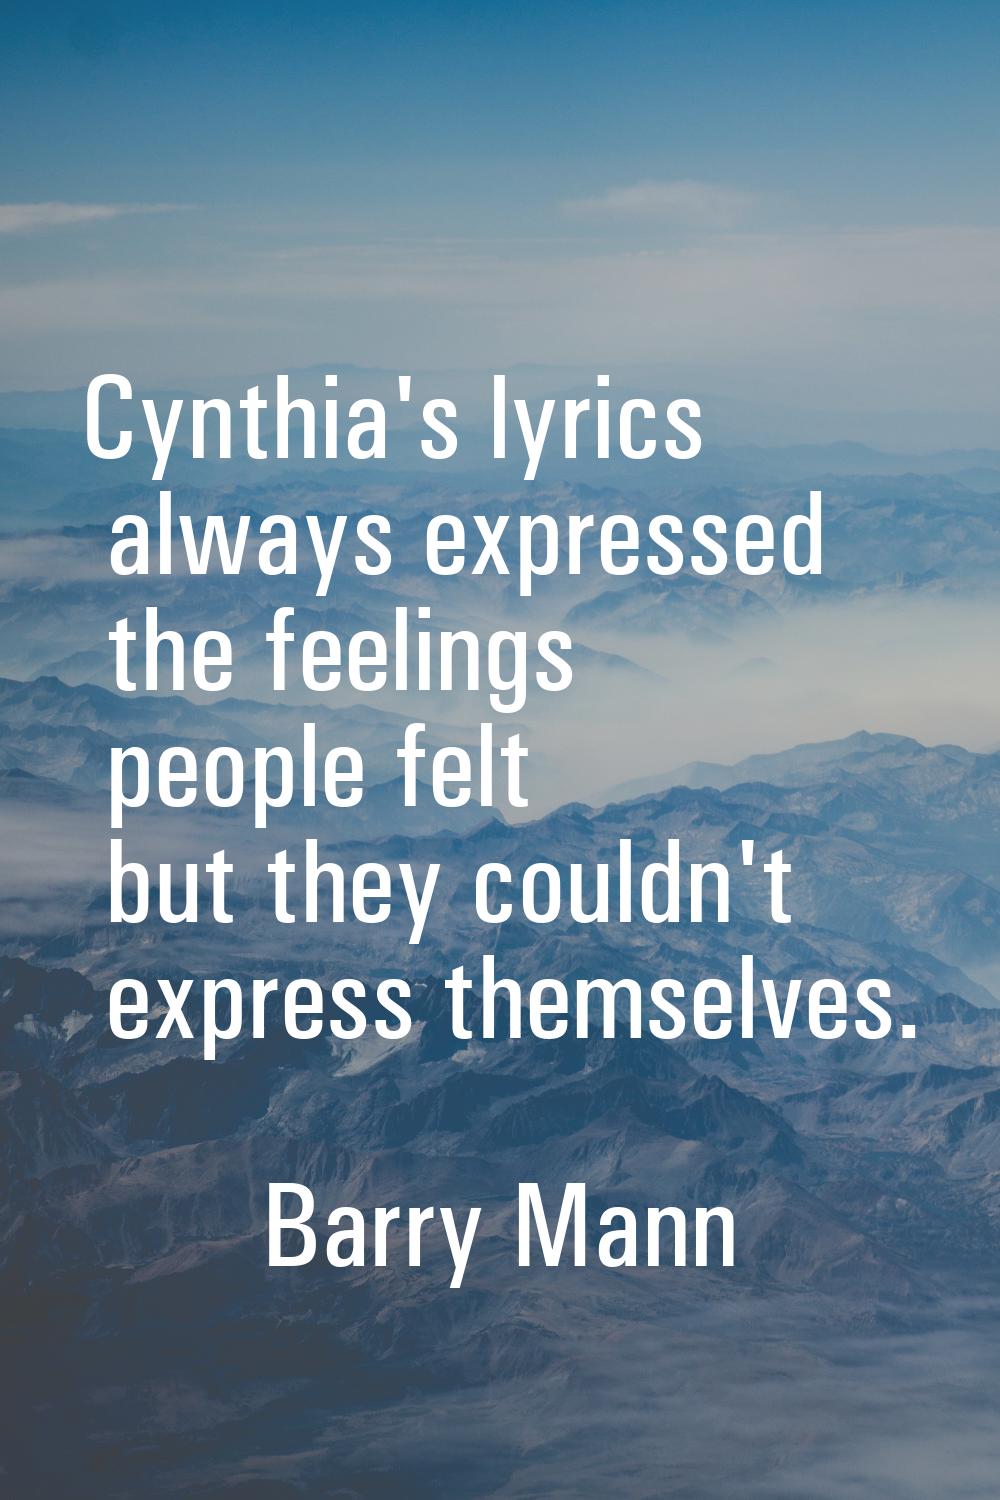 Cynthia's lyrics always expressed the feelings people felt but they couldn't express themselves.